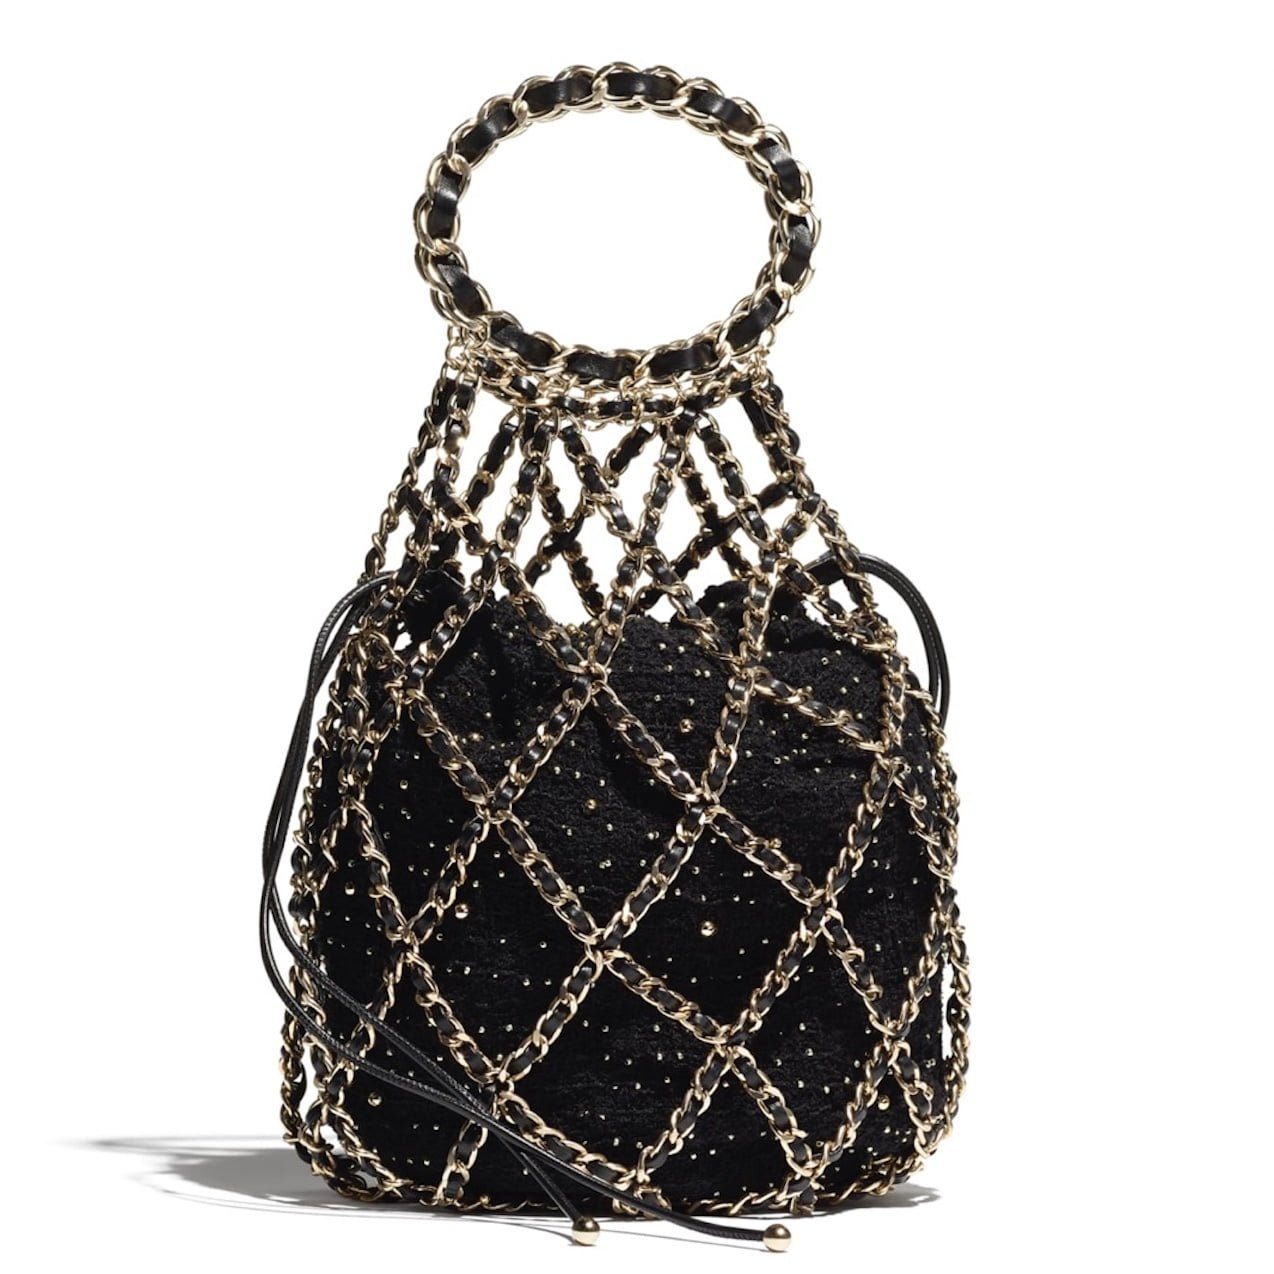 First Look at the Handbags from Chanel Metiérs d'Art 2020/21